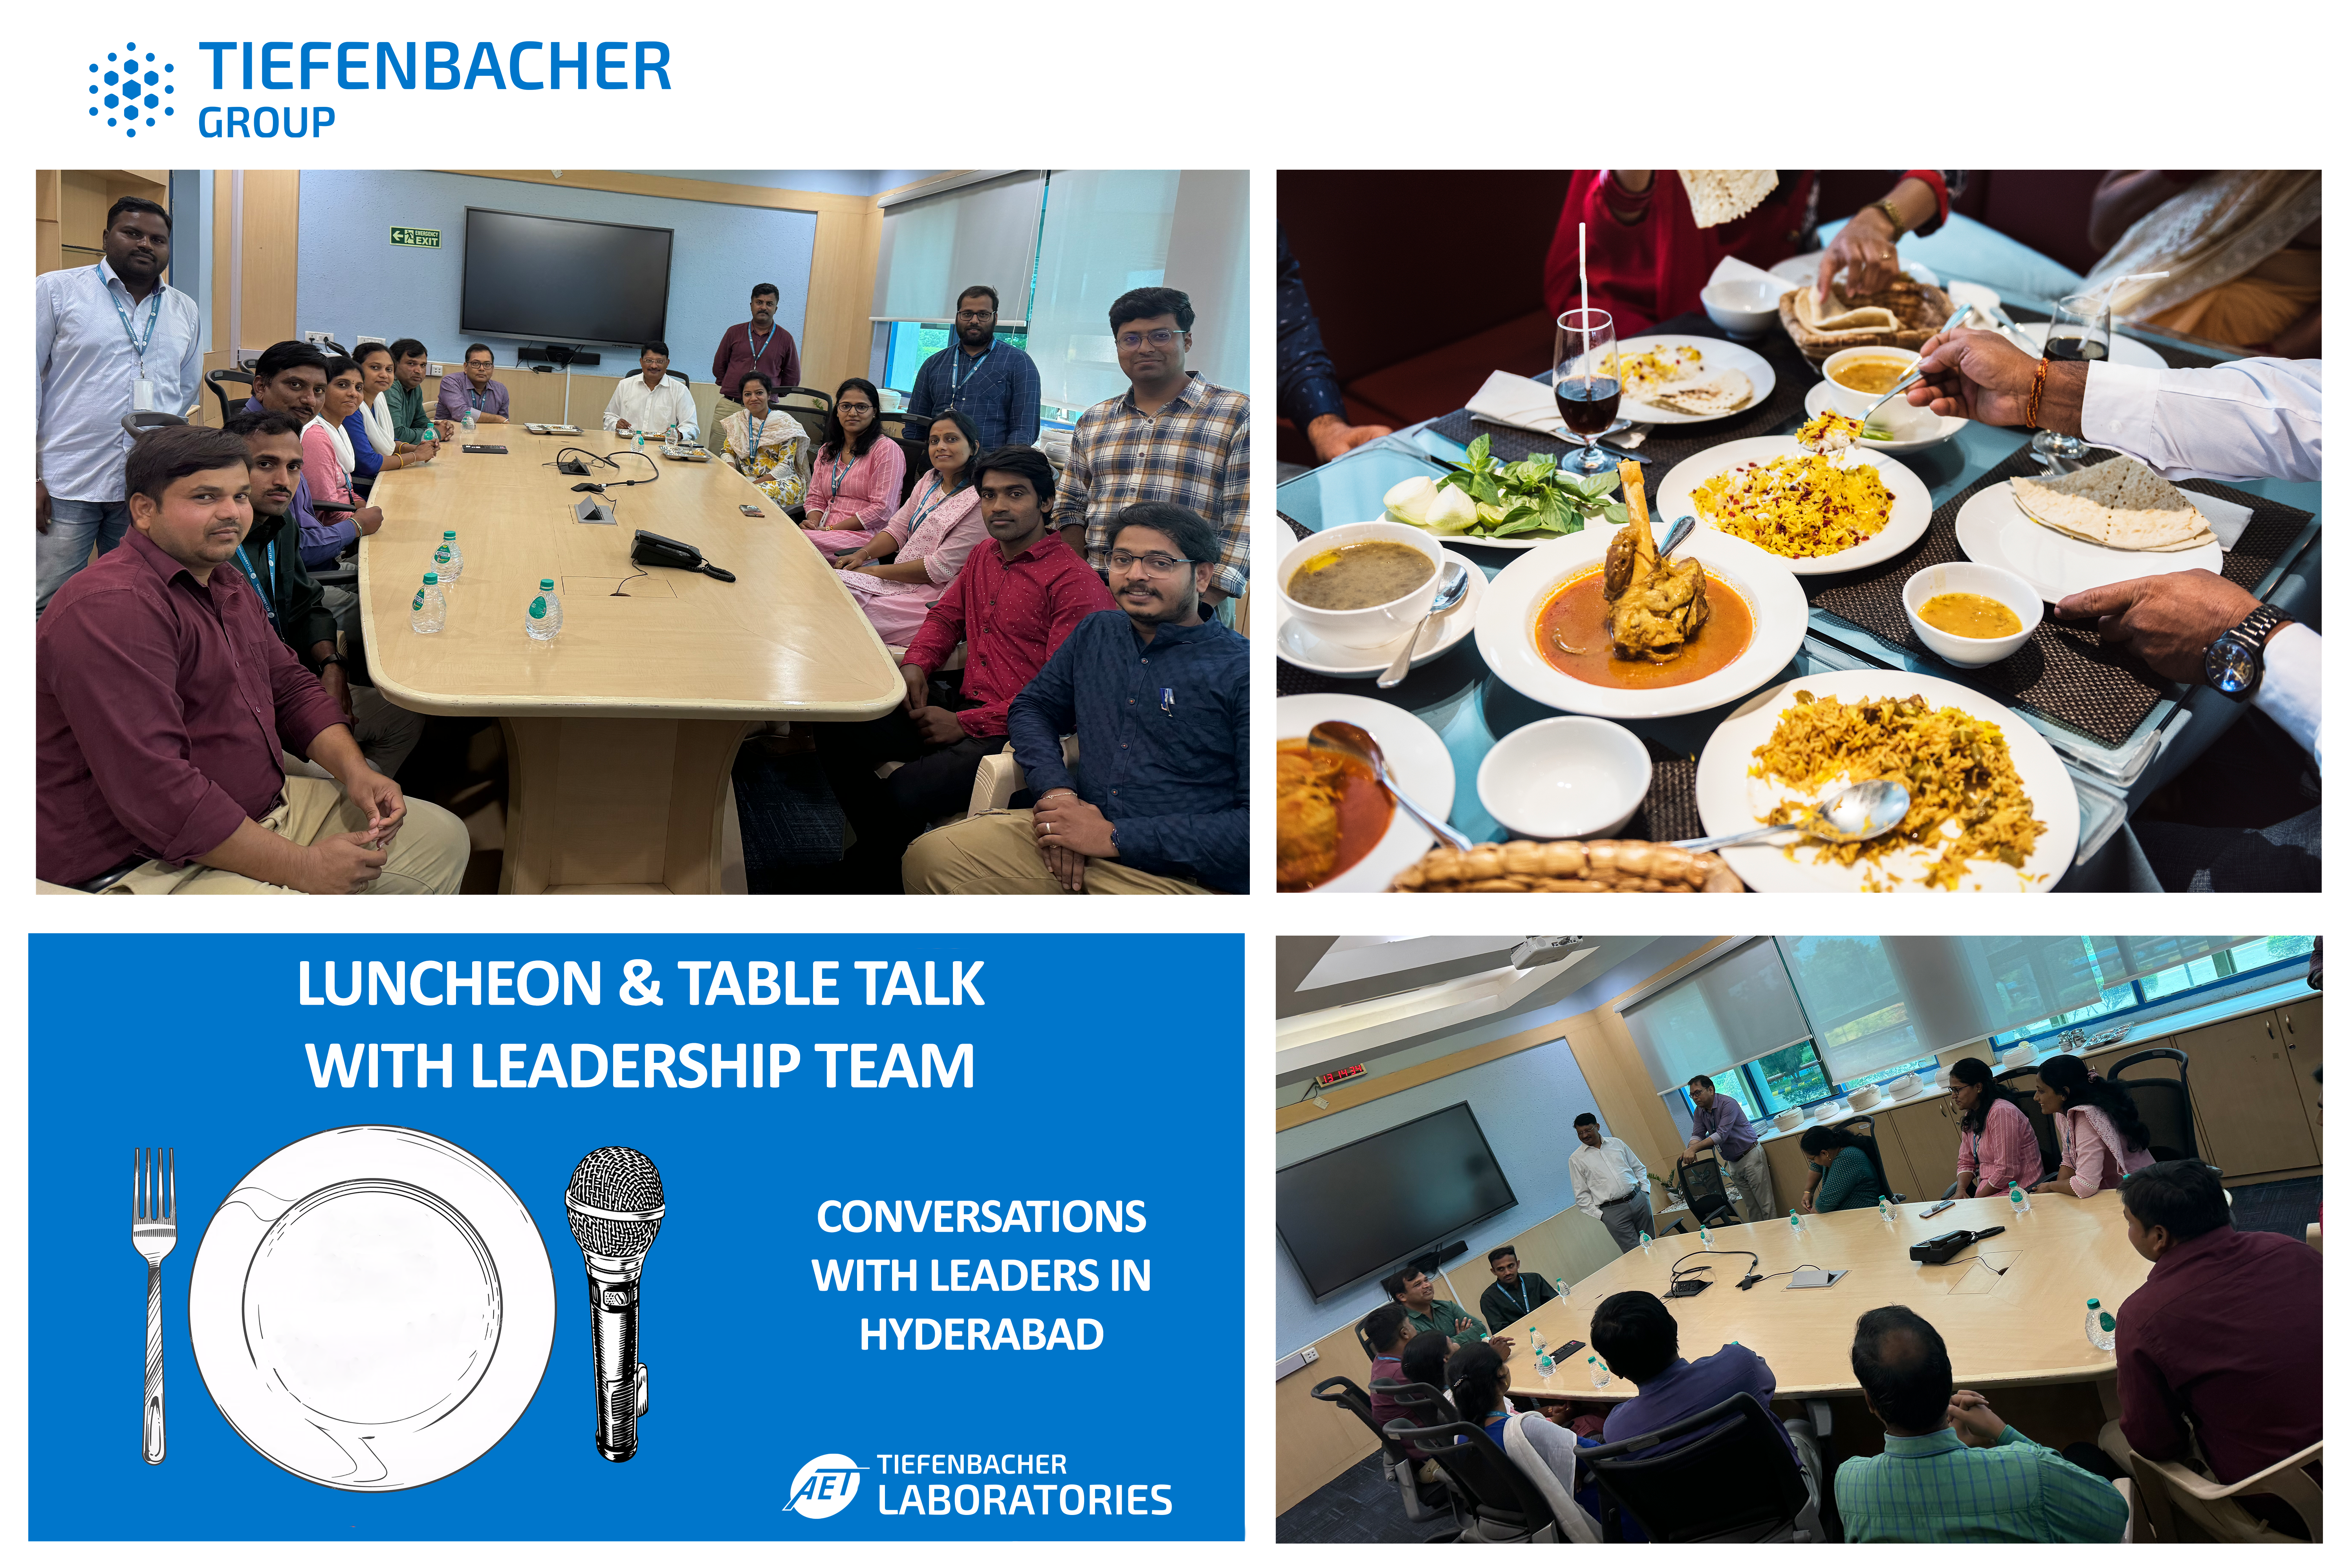 It is a tradition at Tiefenbacher Group that our new employees can take part in an open table talk and luncheon with the leadership team, this time in Hyderabad.